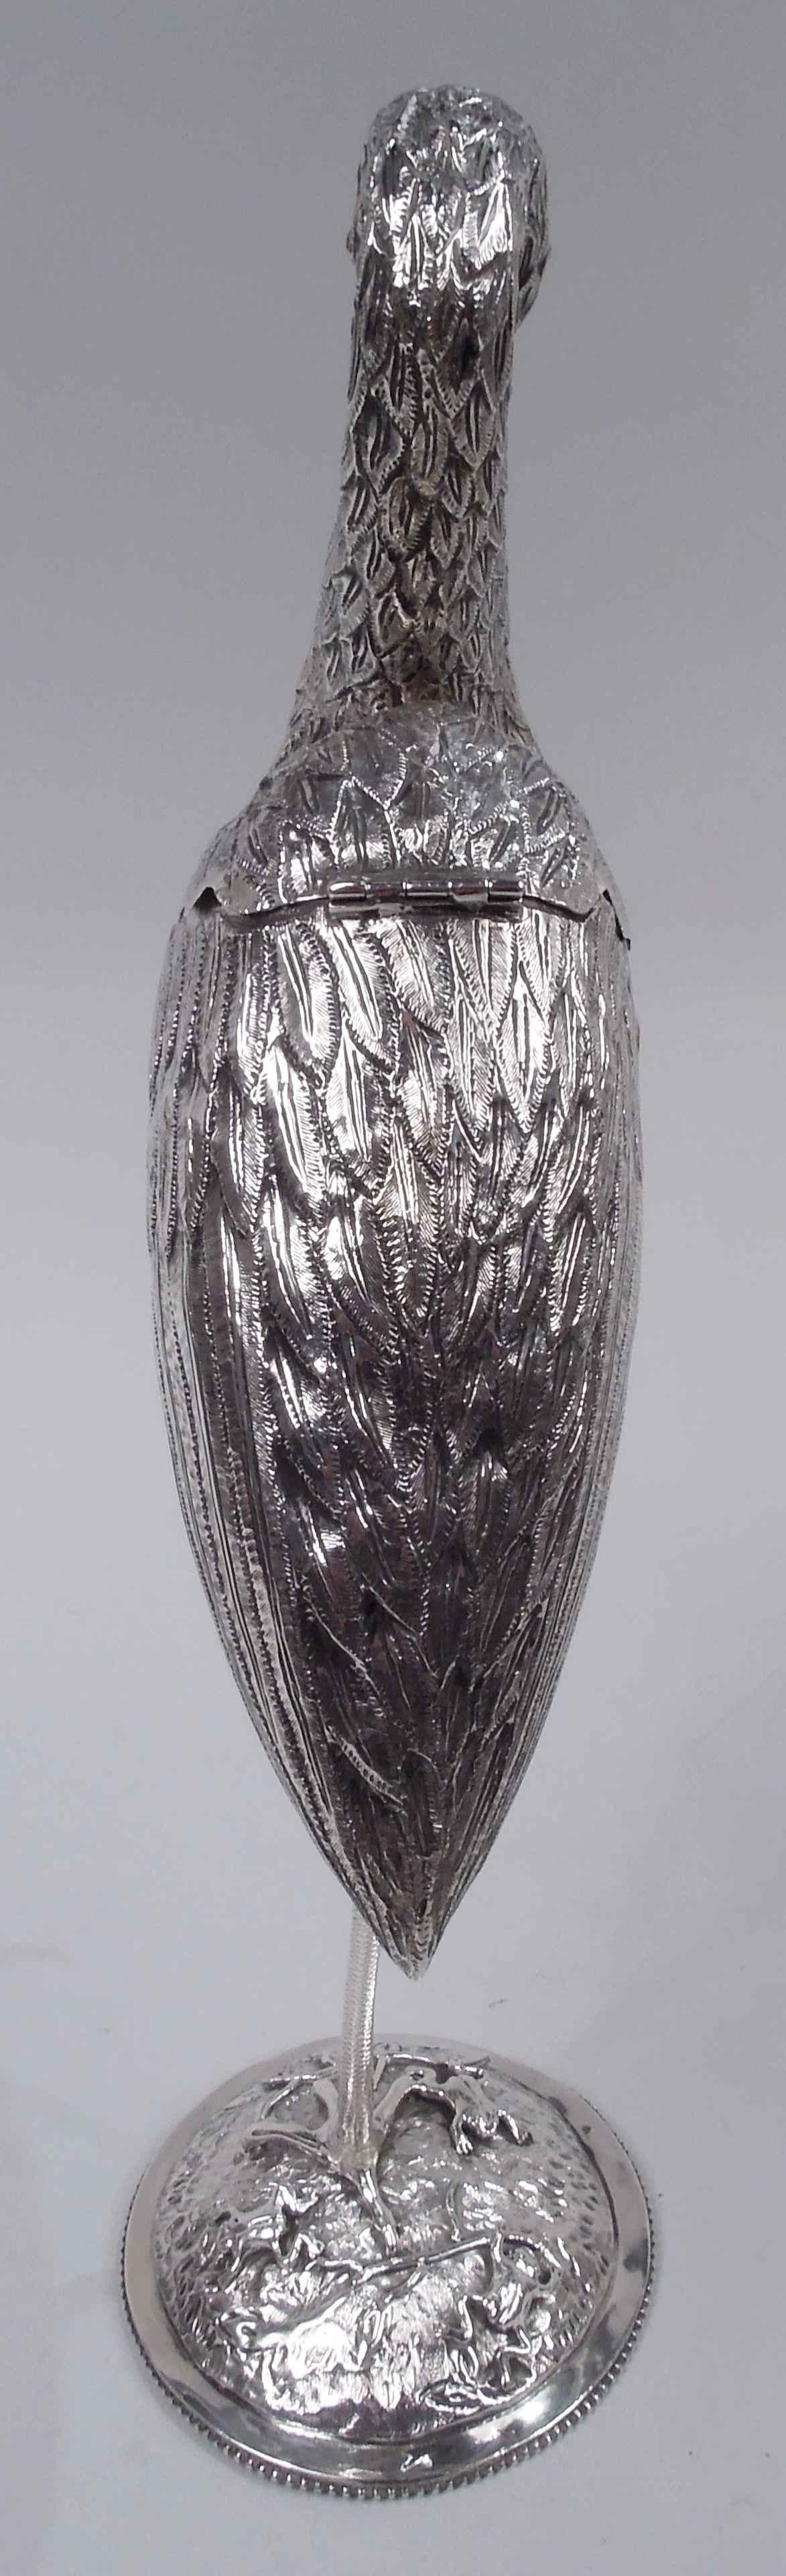 Dutch silver figural spice box. Imported to England in 1891 by BH Joseph & Co. An egret gracefully scrolled neck, red glass eyes, and gaping beak stands on one scaly leg, the other leg raised with clenched talons. A beautiful bird with nicely